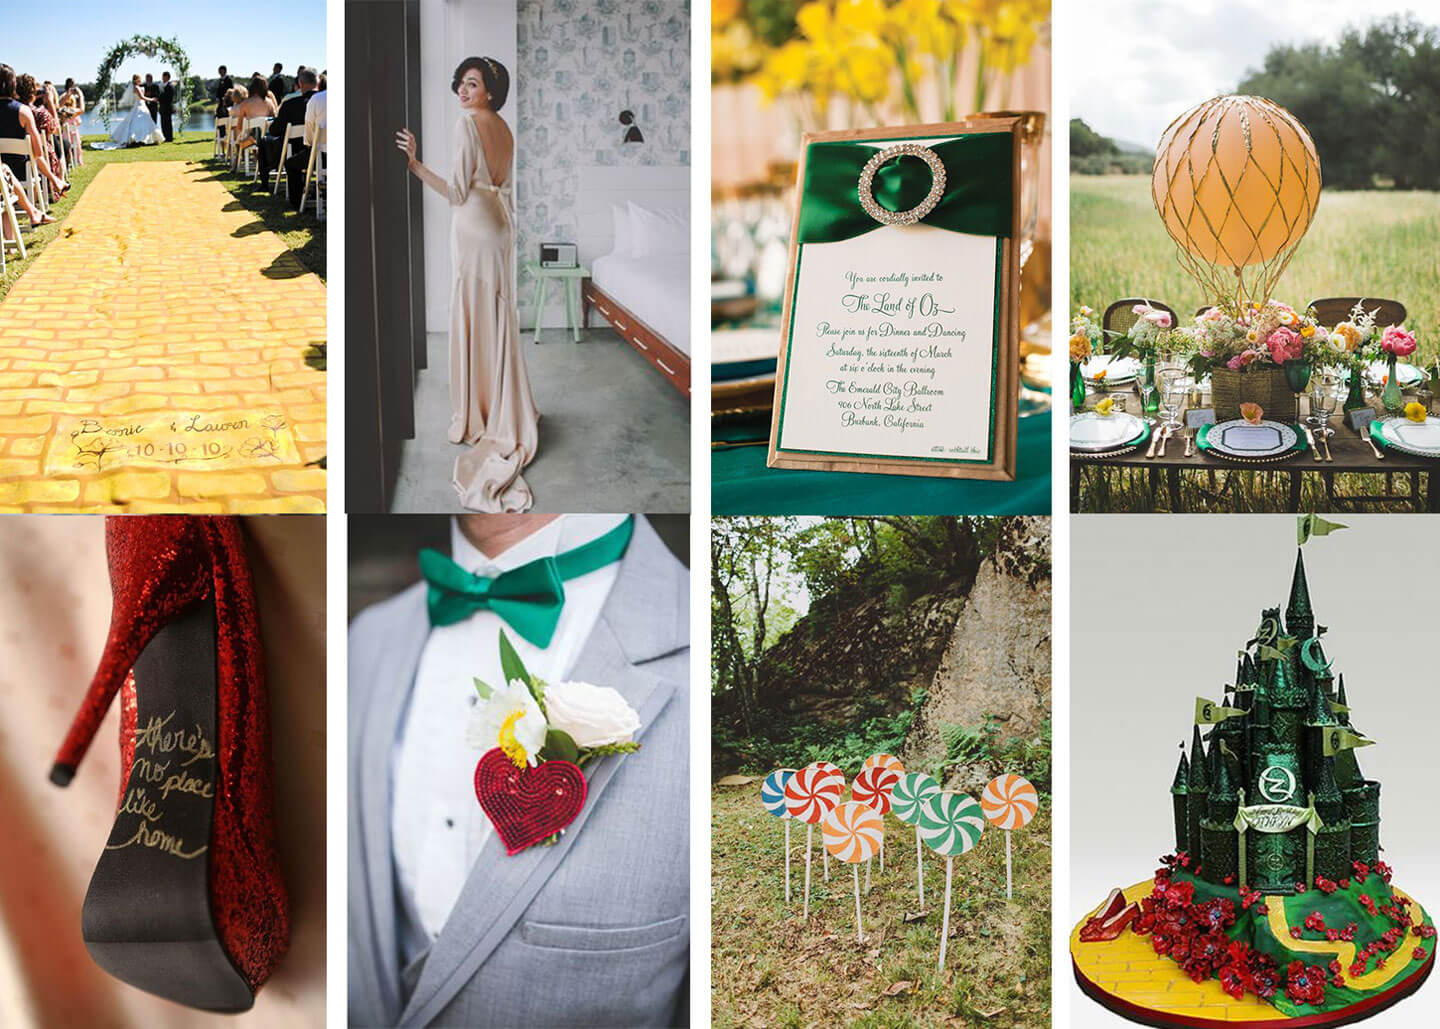 Book-inspired Wedding Themes - Wizard of Oz